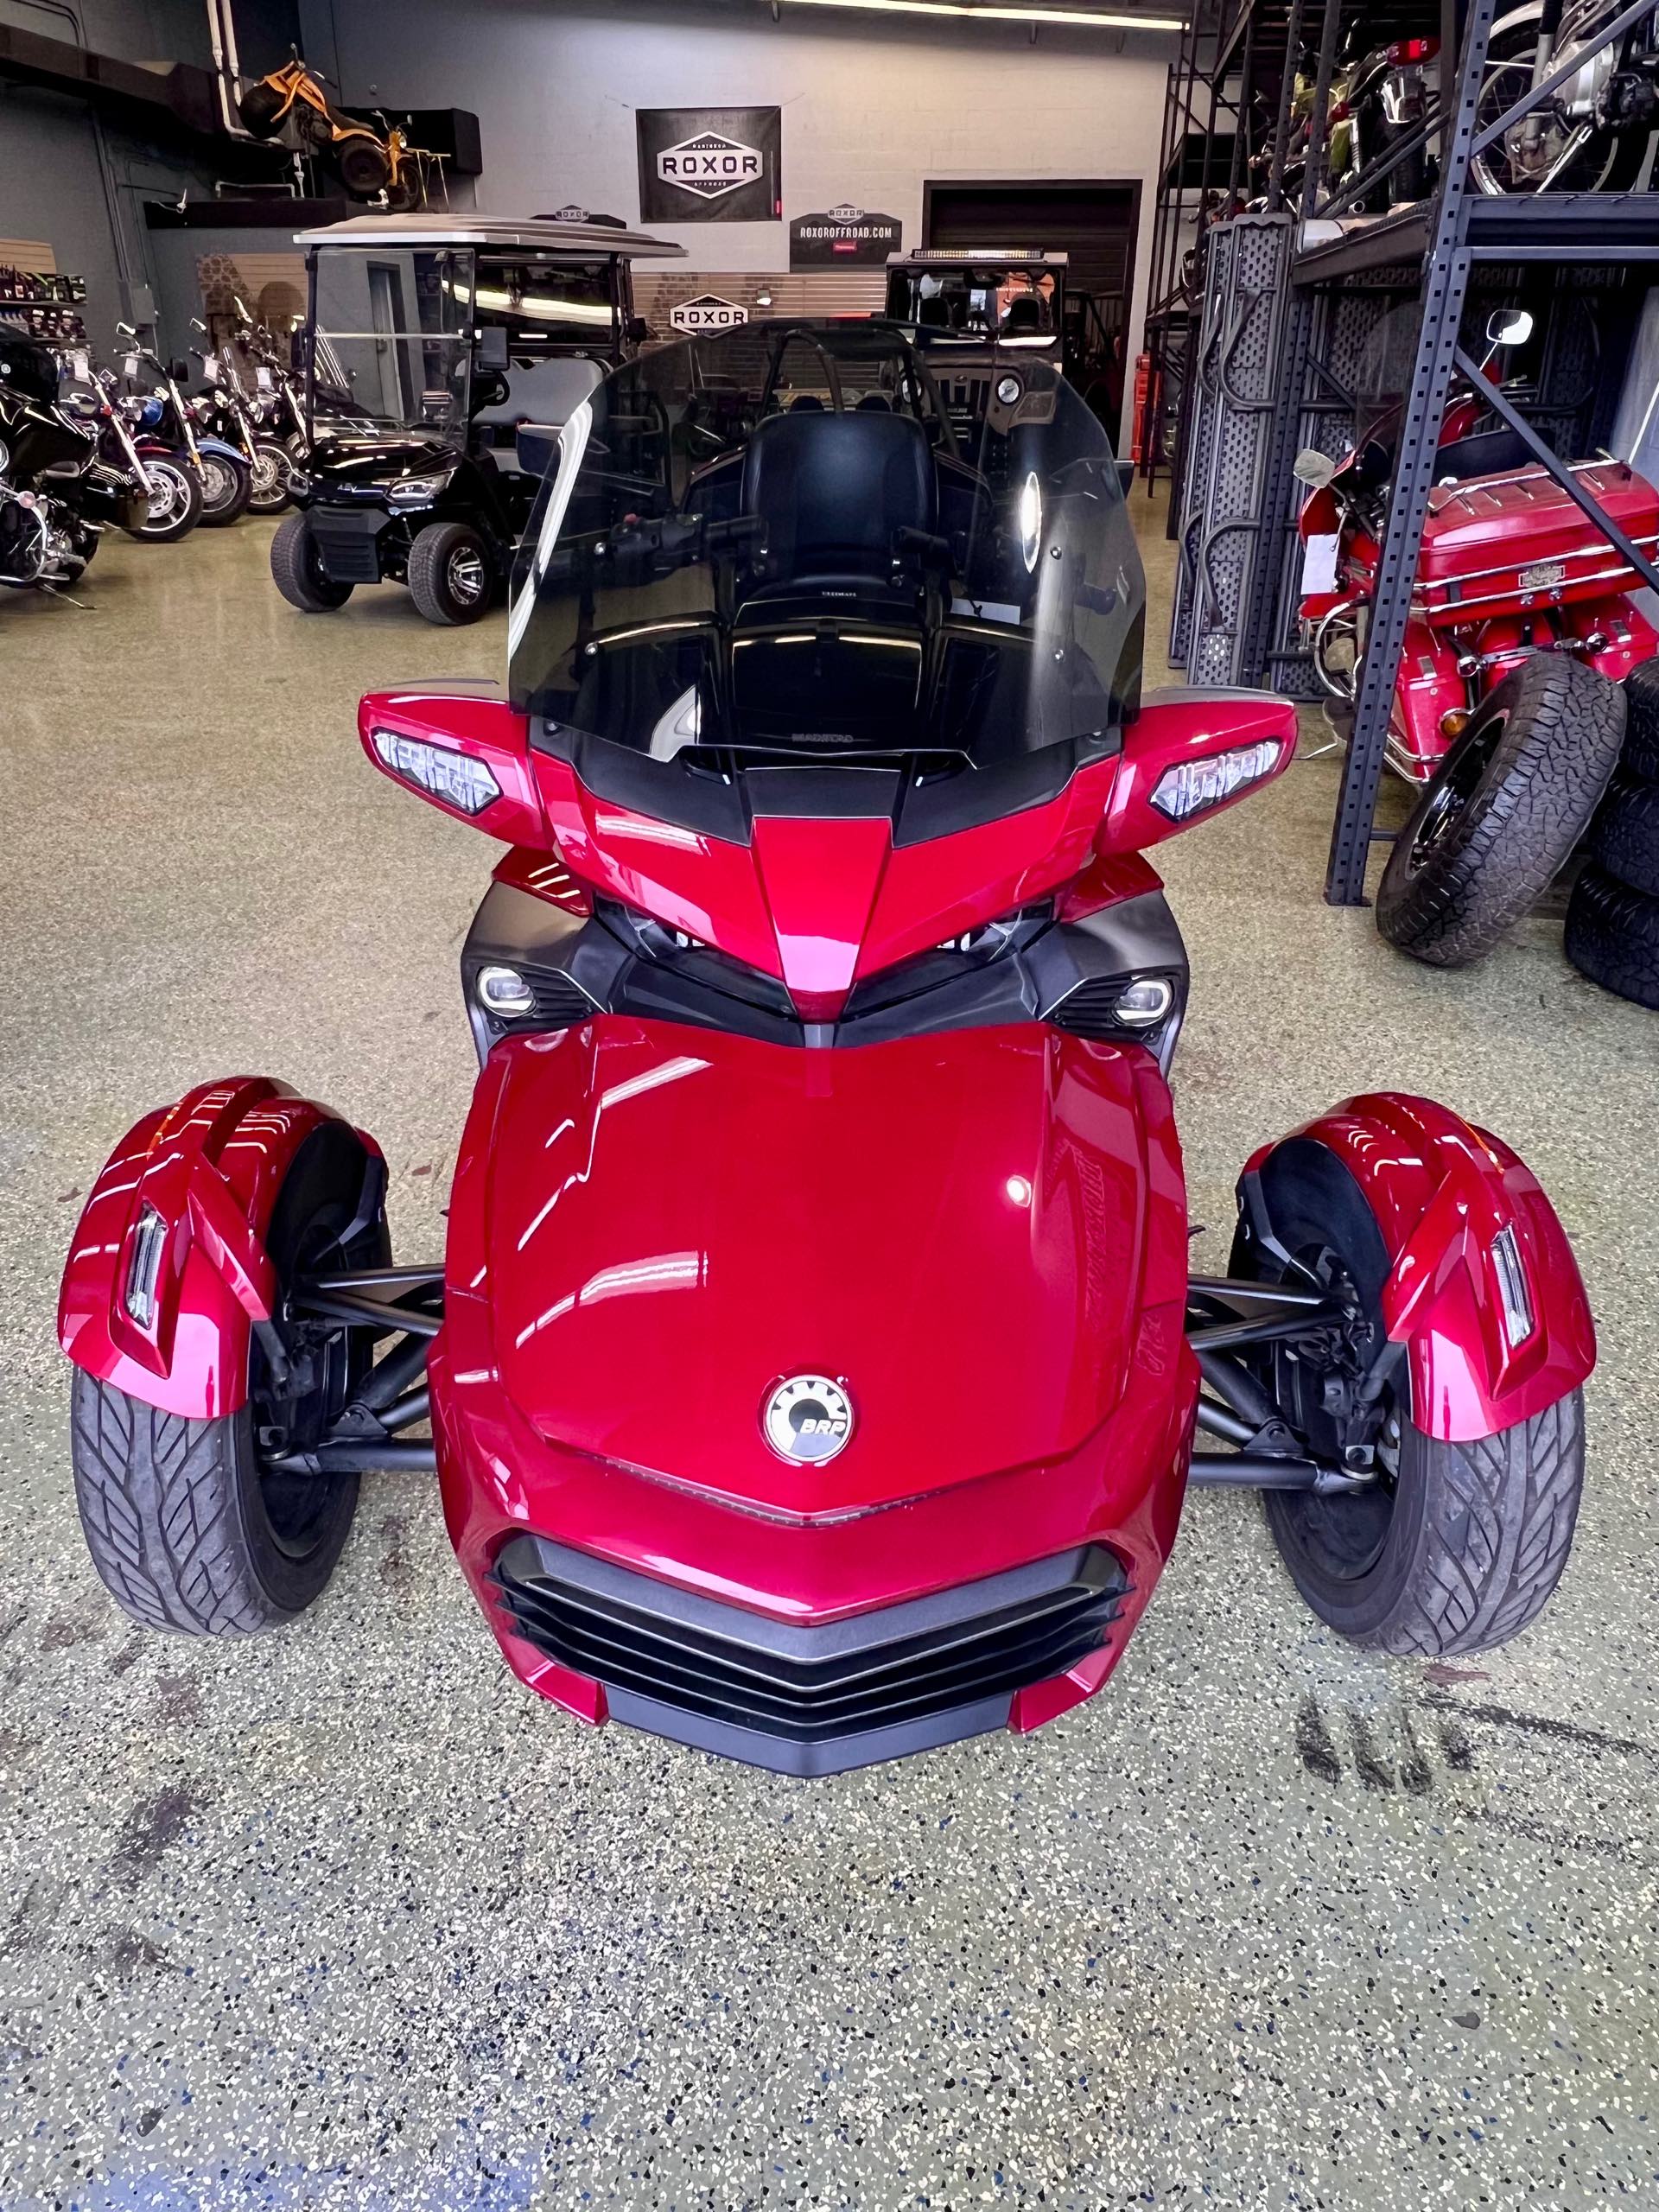 2018 Can-Am Spyder F3 Limited at Thornton's Motorcycle Sales, Madison, IN